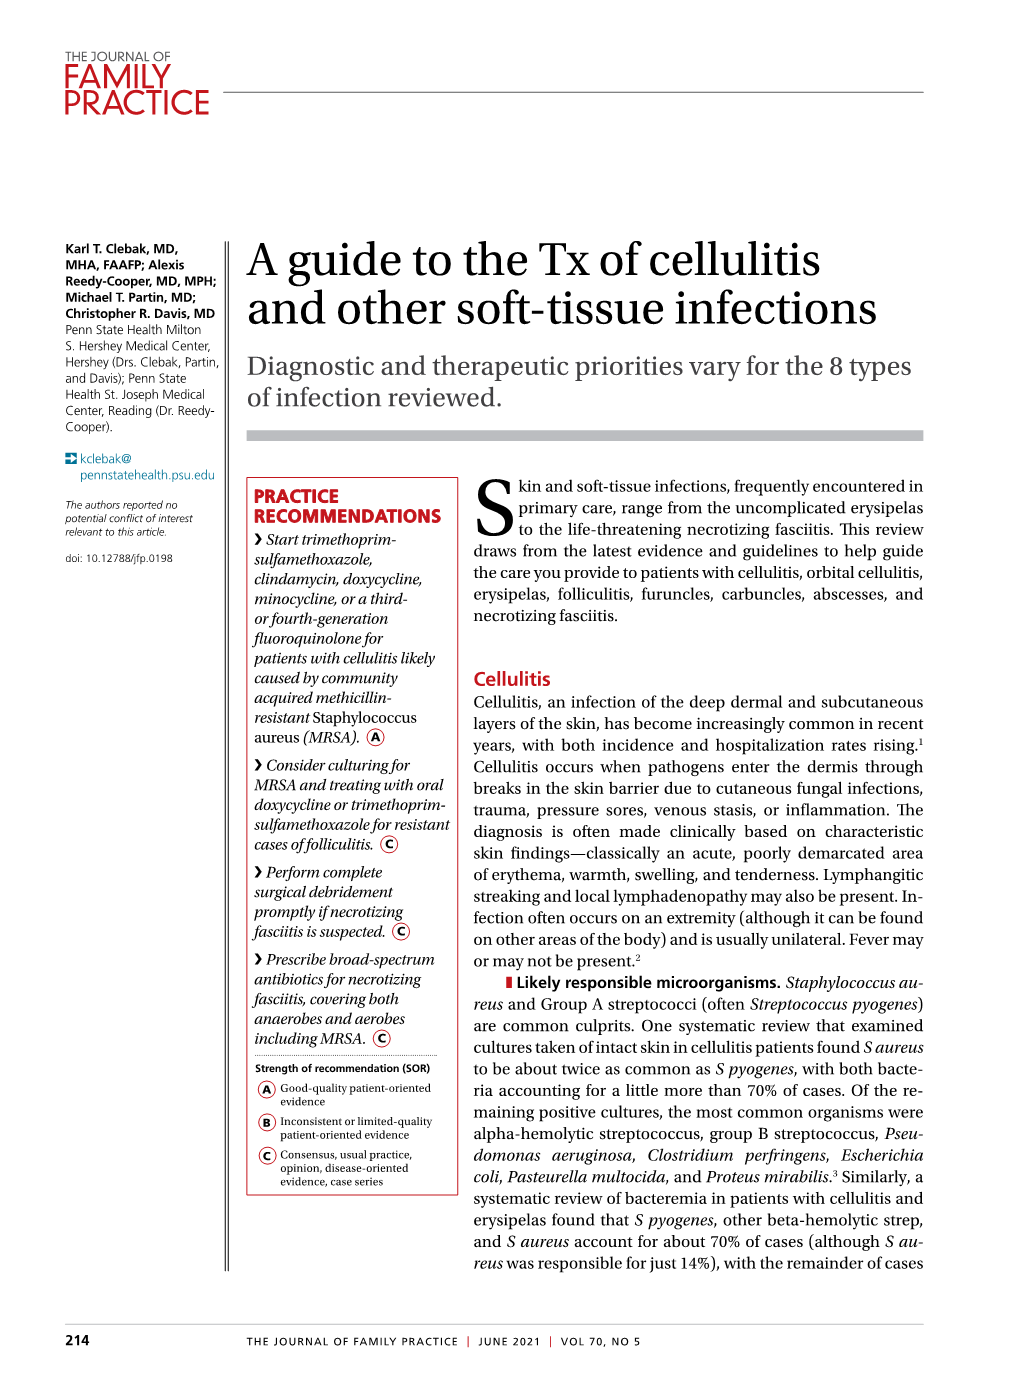 A Guide to the Tx of Cellulitis and Other Soft-Tissue Infections